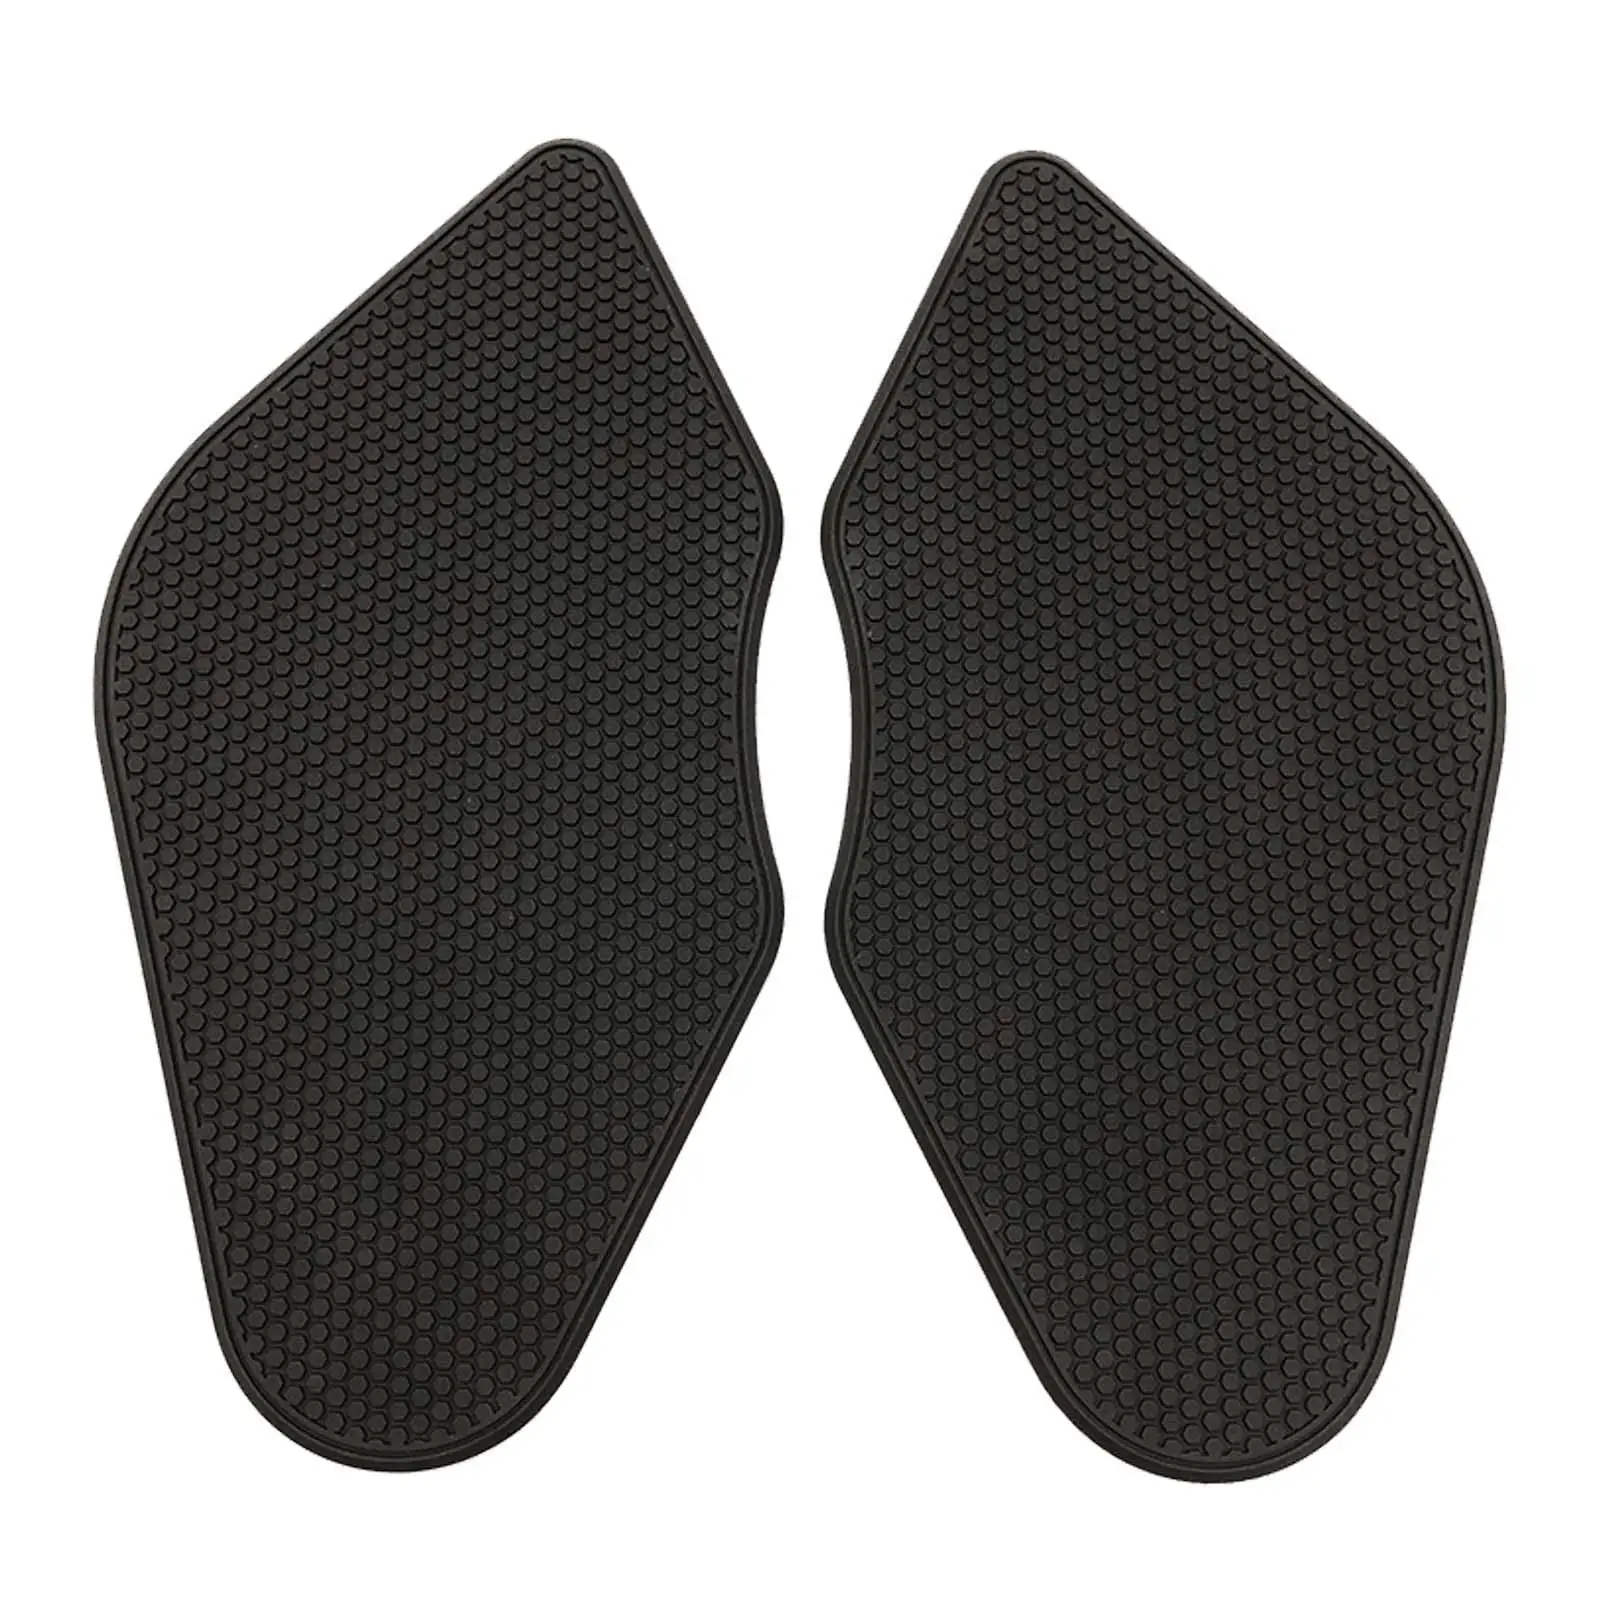 

2Pcs Motorcycle Fuel Tank Pad Motorbike Accessories Anti Slip Heat Insulation Protection for Suzuk V-strom 650 ABS XT 17-23